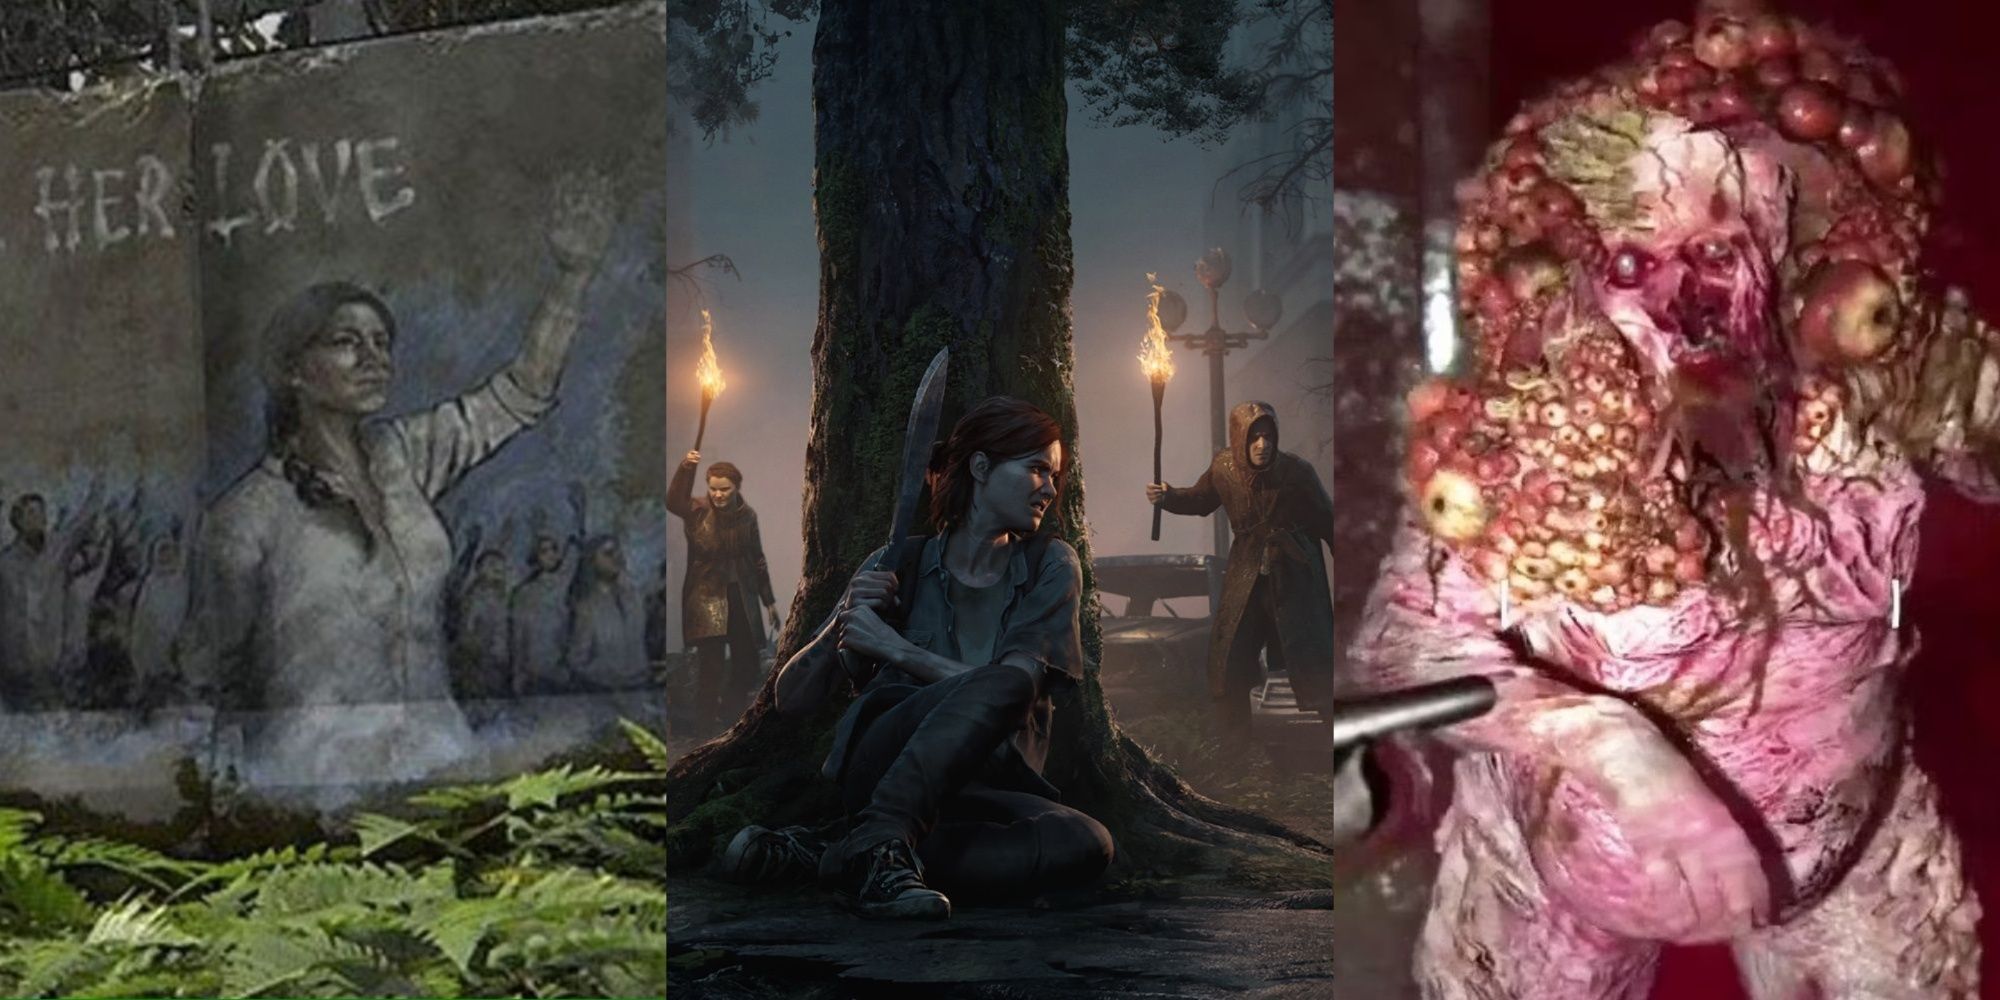 Three image collage of the Seraphite Prophet raising her arm in front of followers as a mural, Ellie hiding from Seraphites, and a Shambler enemy with a shotgun being aimed.